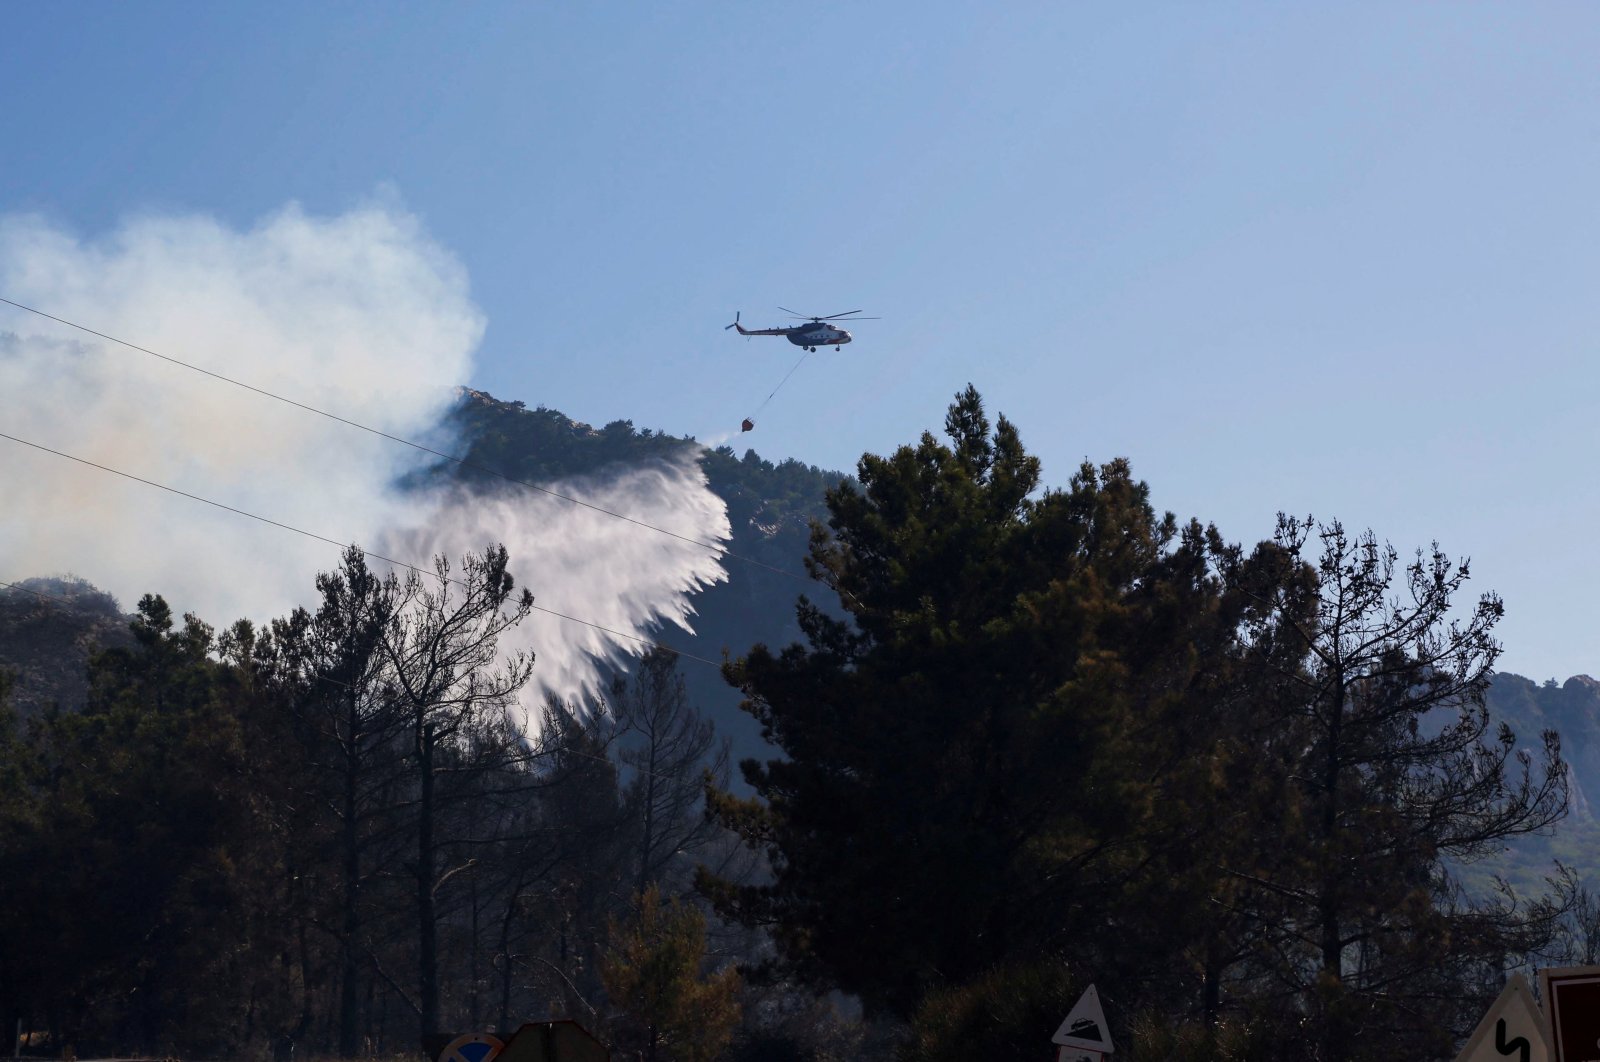 A helicopter drops water to extinguish a wildfire in Datça, Turkey July 14, 2022. (Reuters Photo)